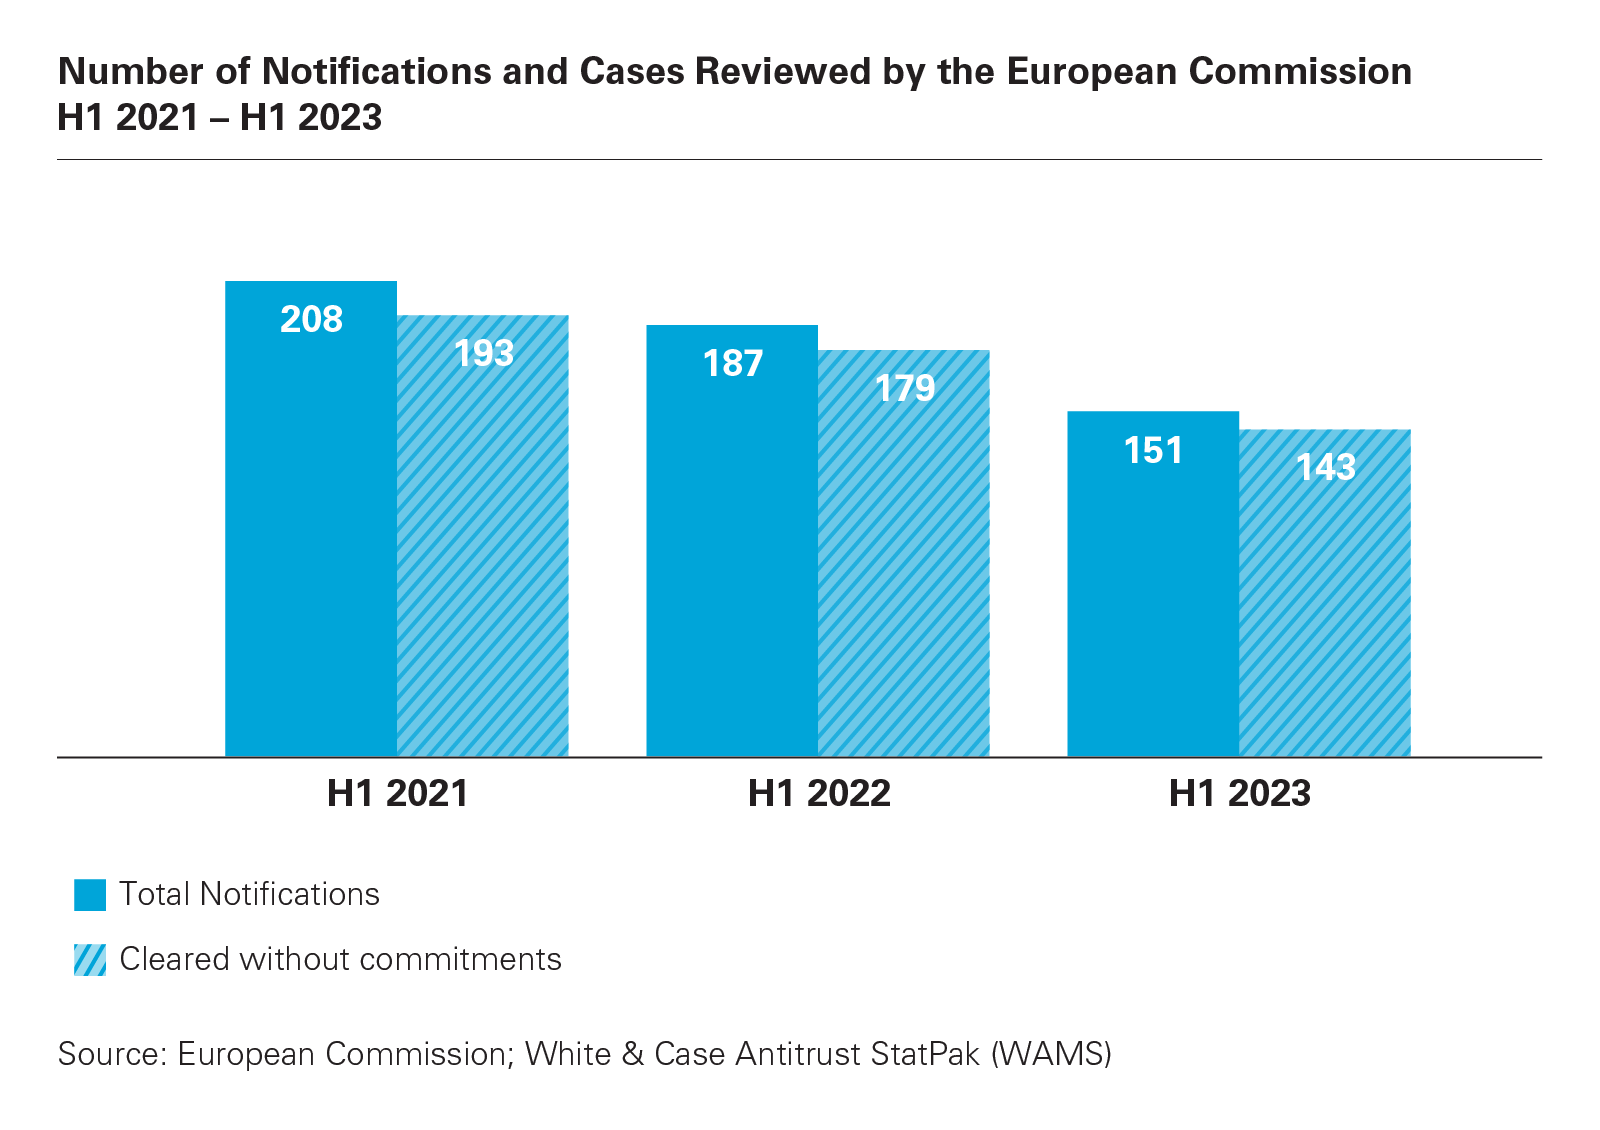 Number of Notifications and Cases Reviewed by the European Commission H1 2021 - H1 2023 graph